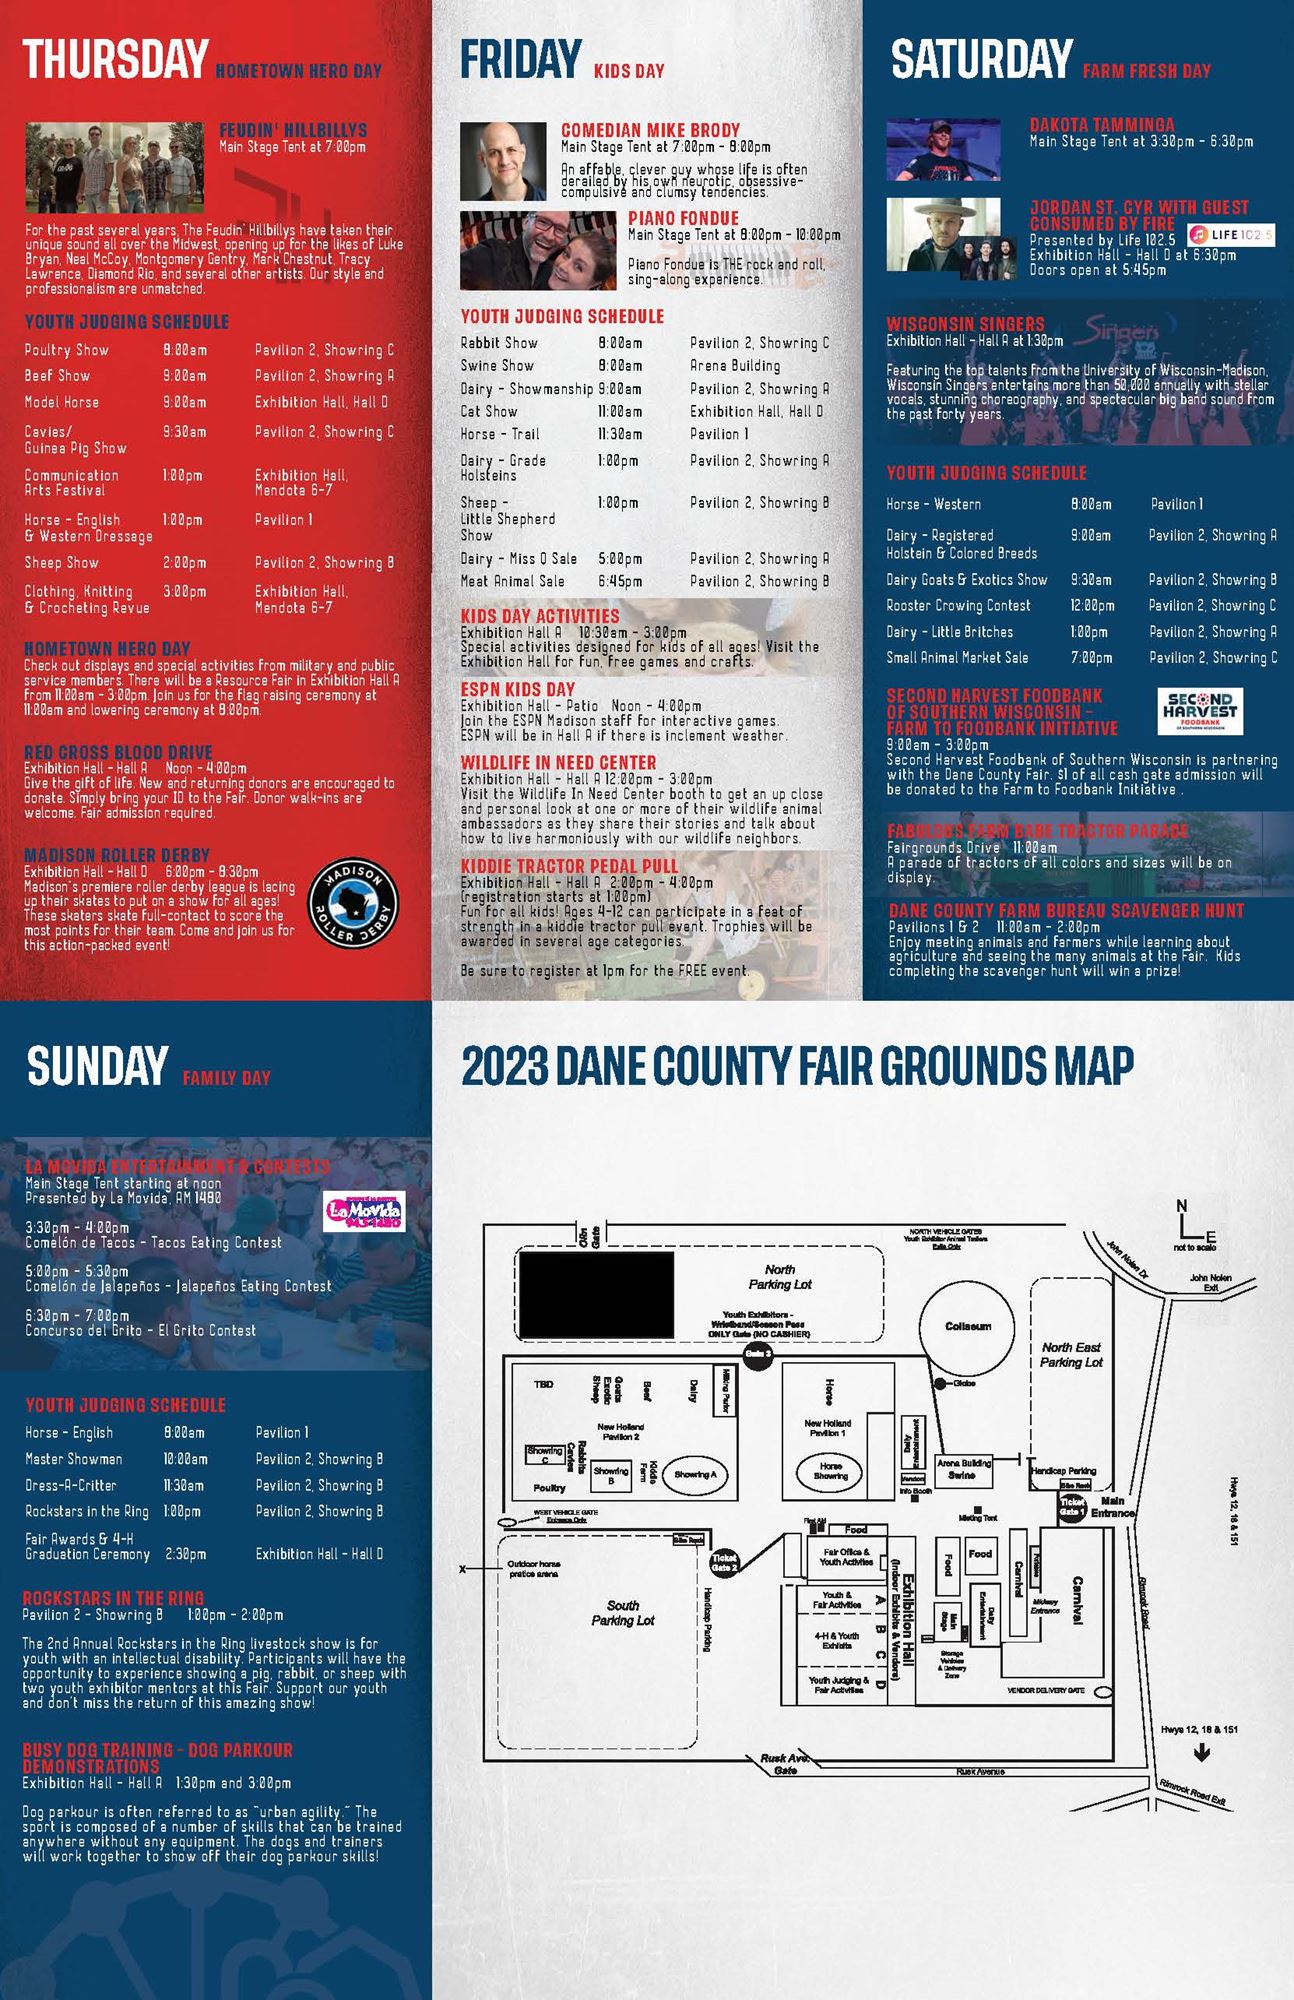 Images.ashx?t=ig&rid=DaneCountyFairWI&i=DCF 2023  Brochure Final Low Res   Page 1 